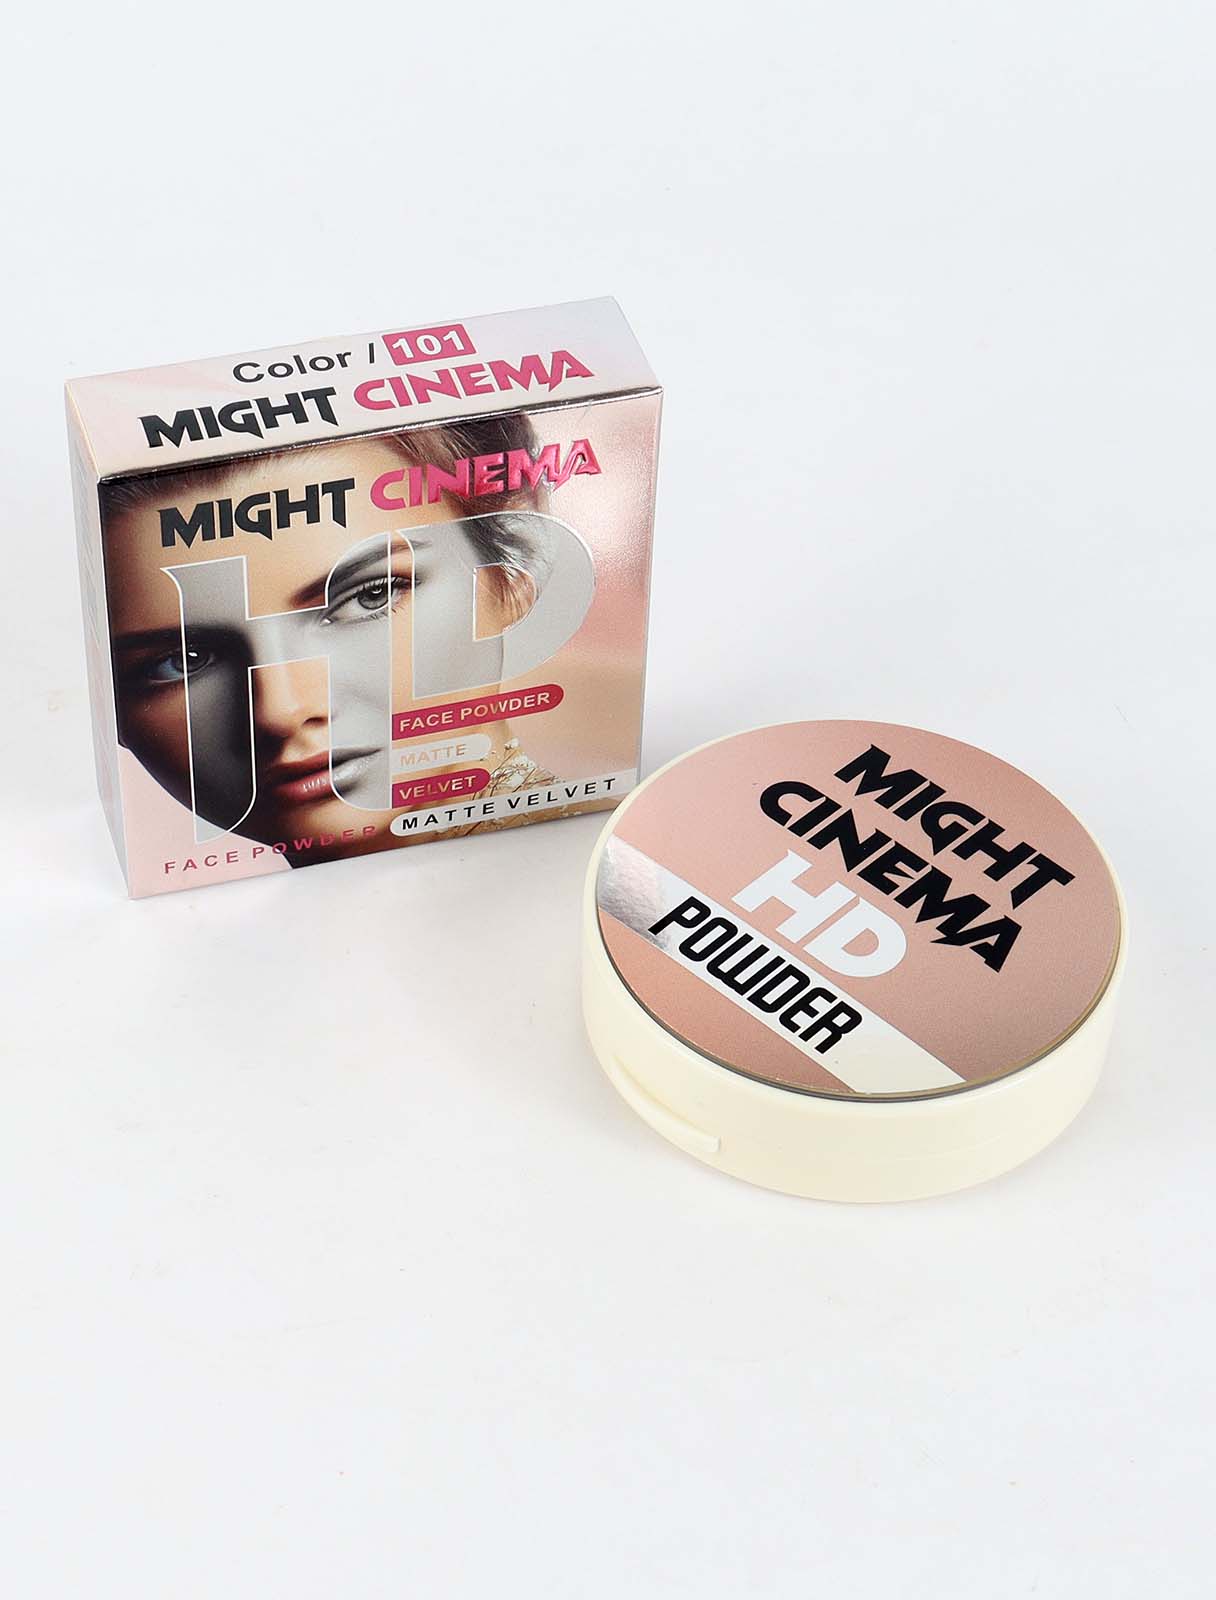 Face powder box with makeup sponge mirror from Might Cinema